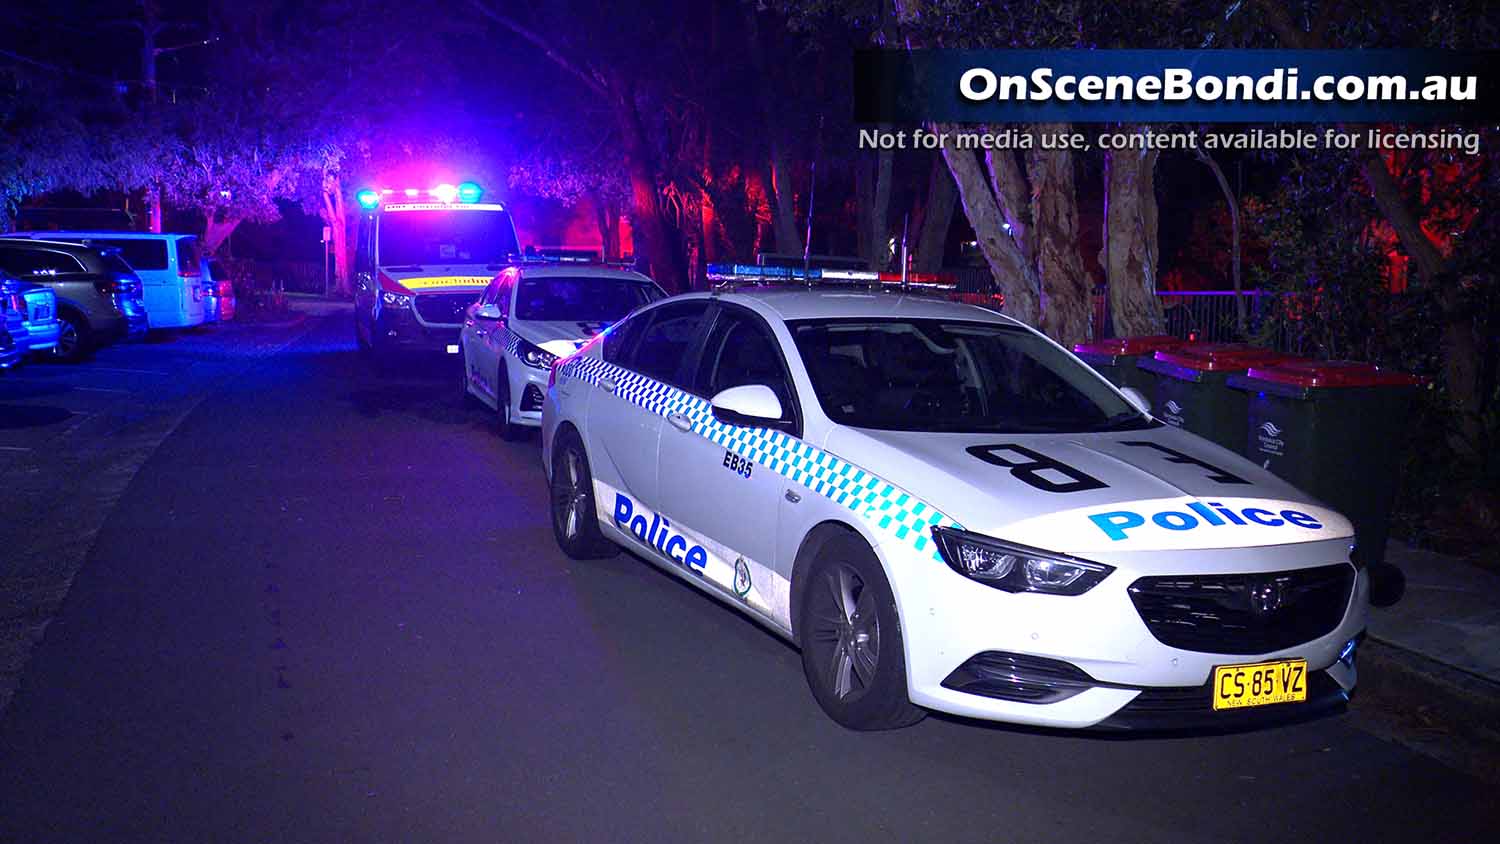 20221026 coogee stabbing 001